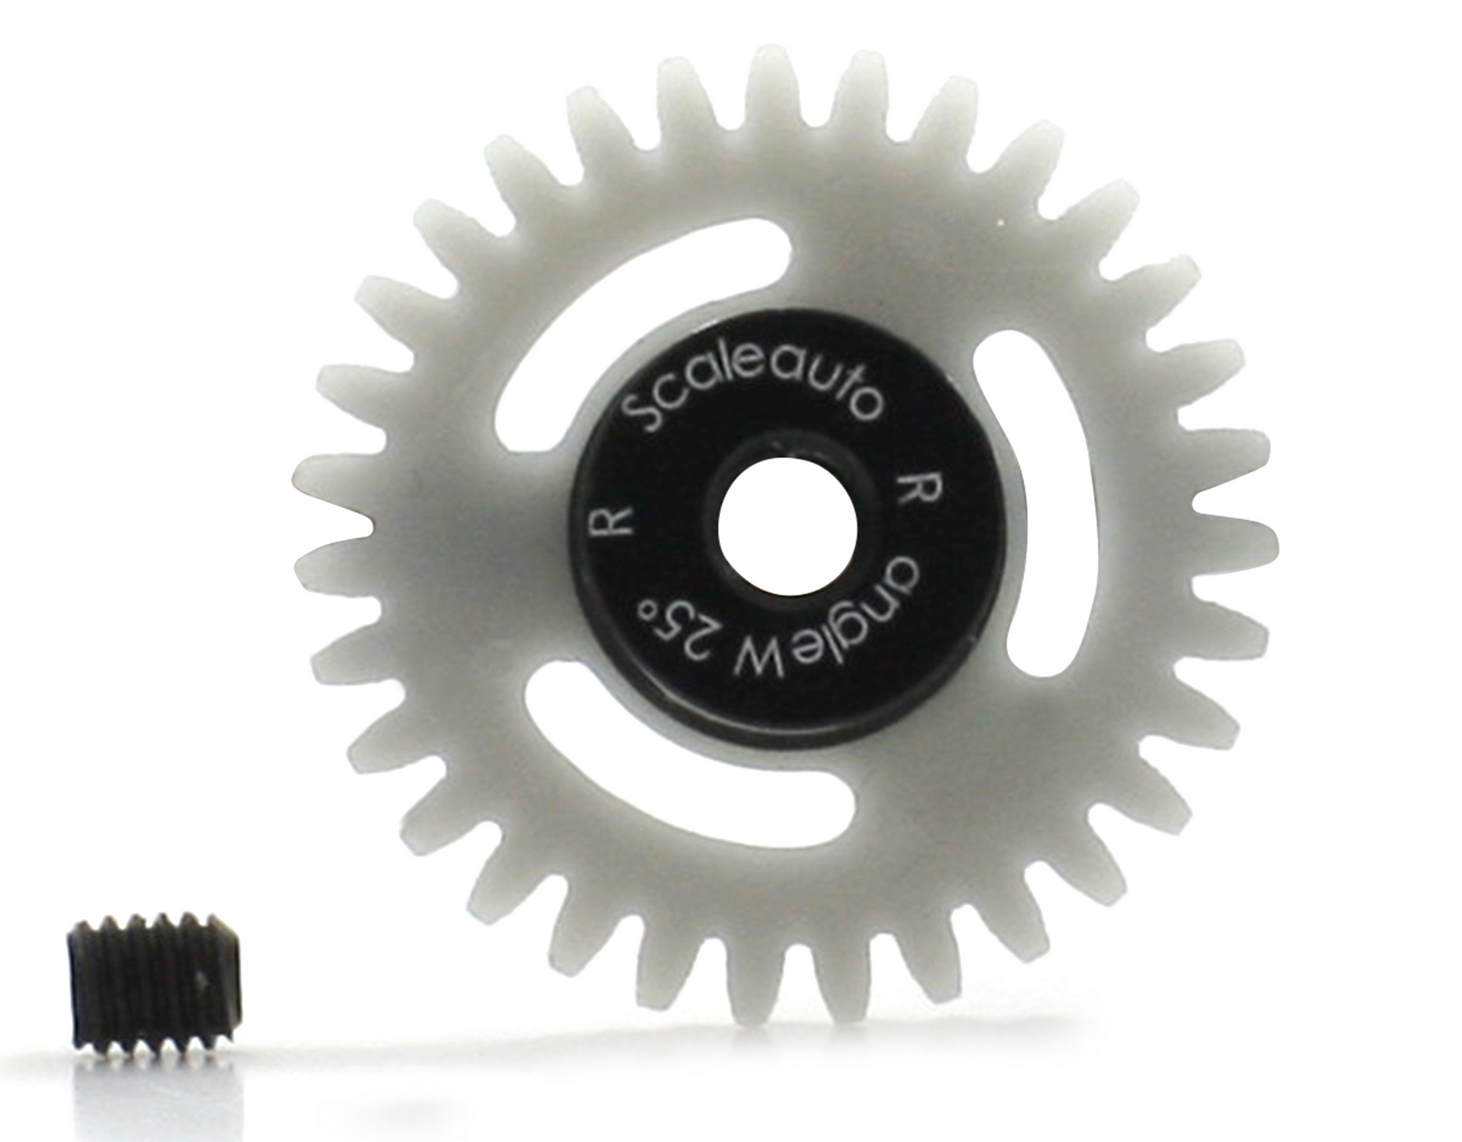 Scaleauto SC-1171R - 31T Polyamide Anglewinder Gear - 17mm diameter - for 3/32" axles